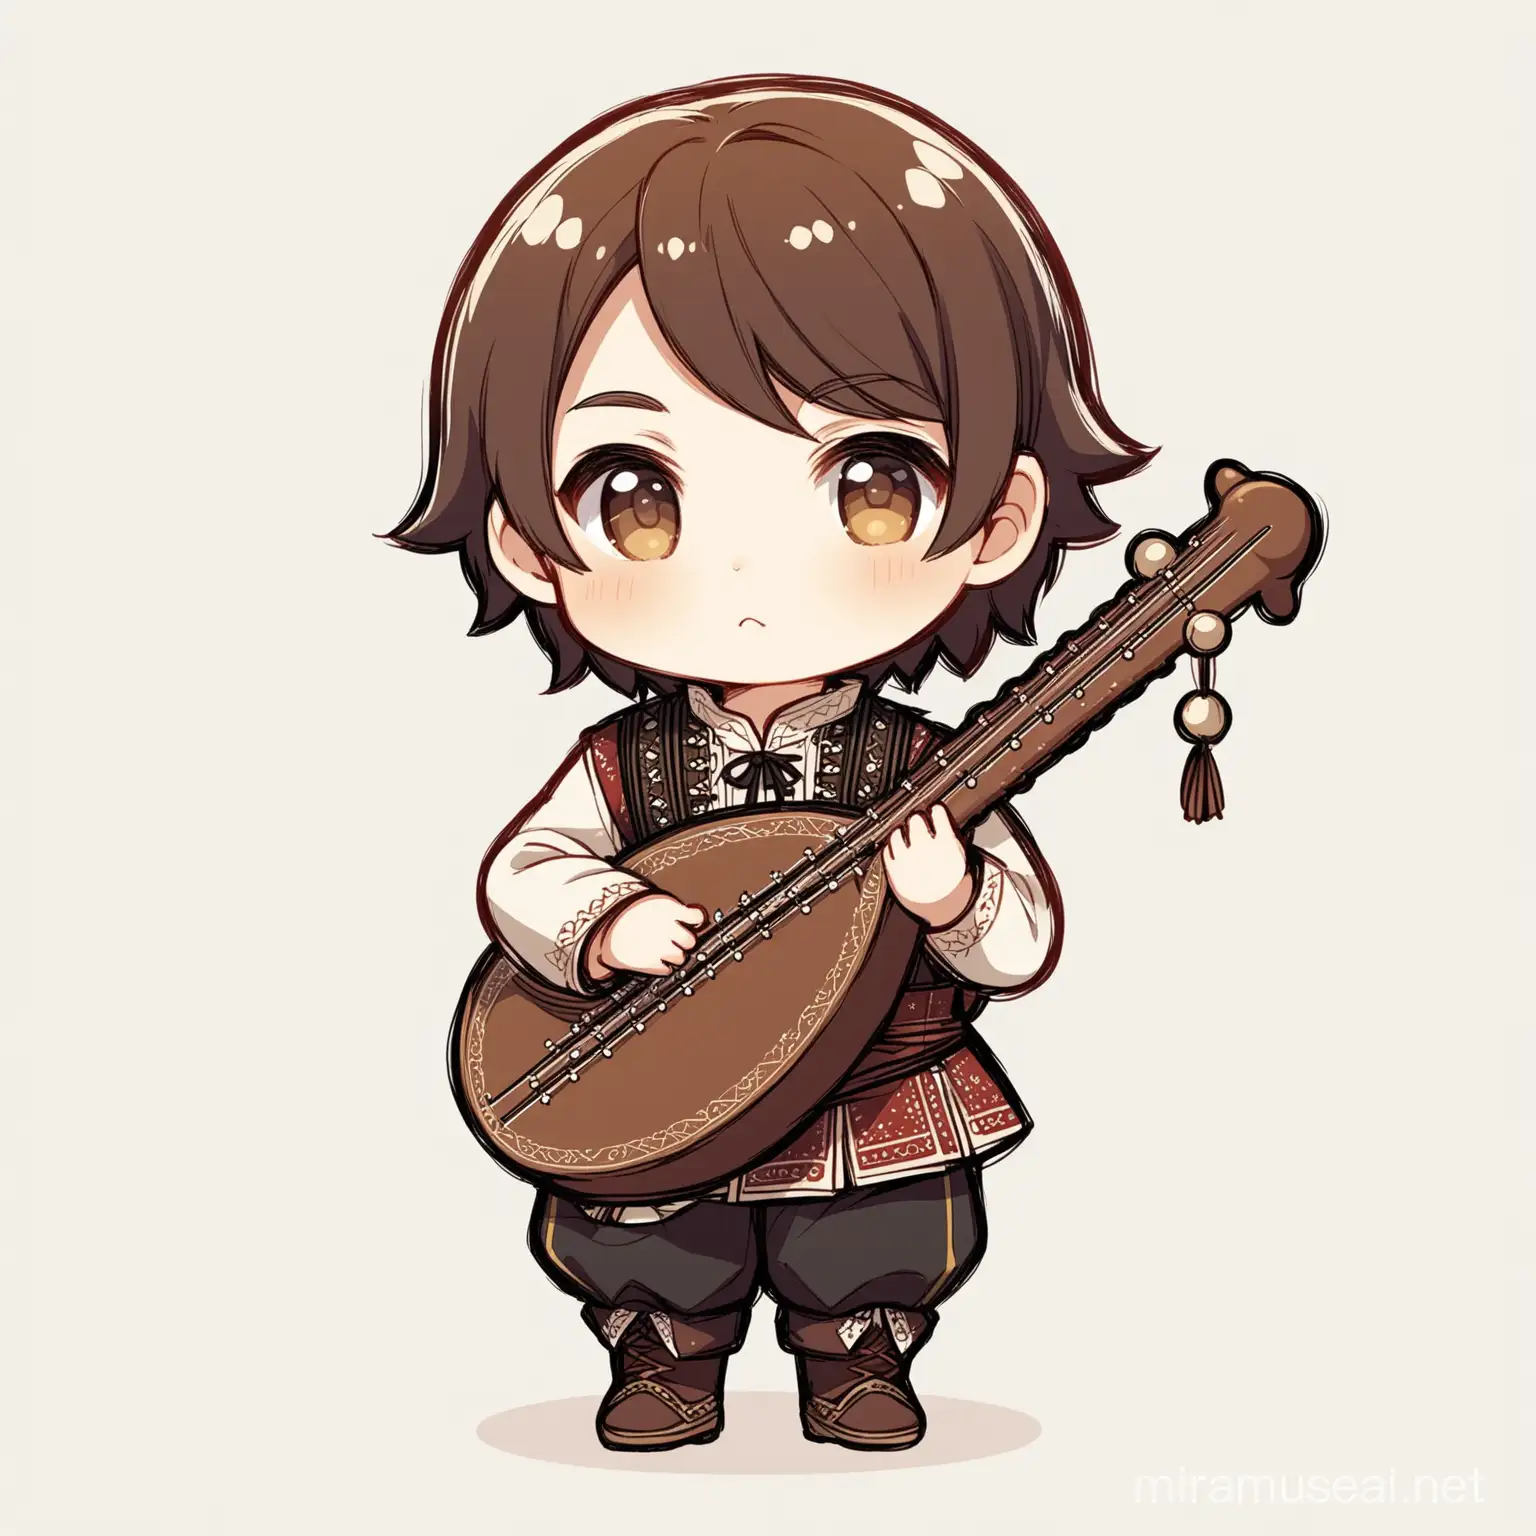 male child bard with a hurdy gurdy on white background full body chibi style